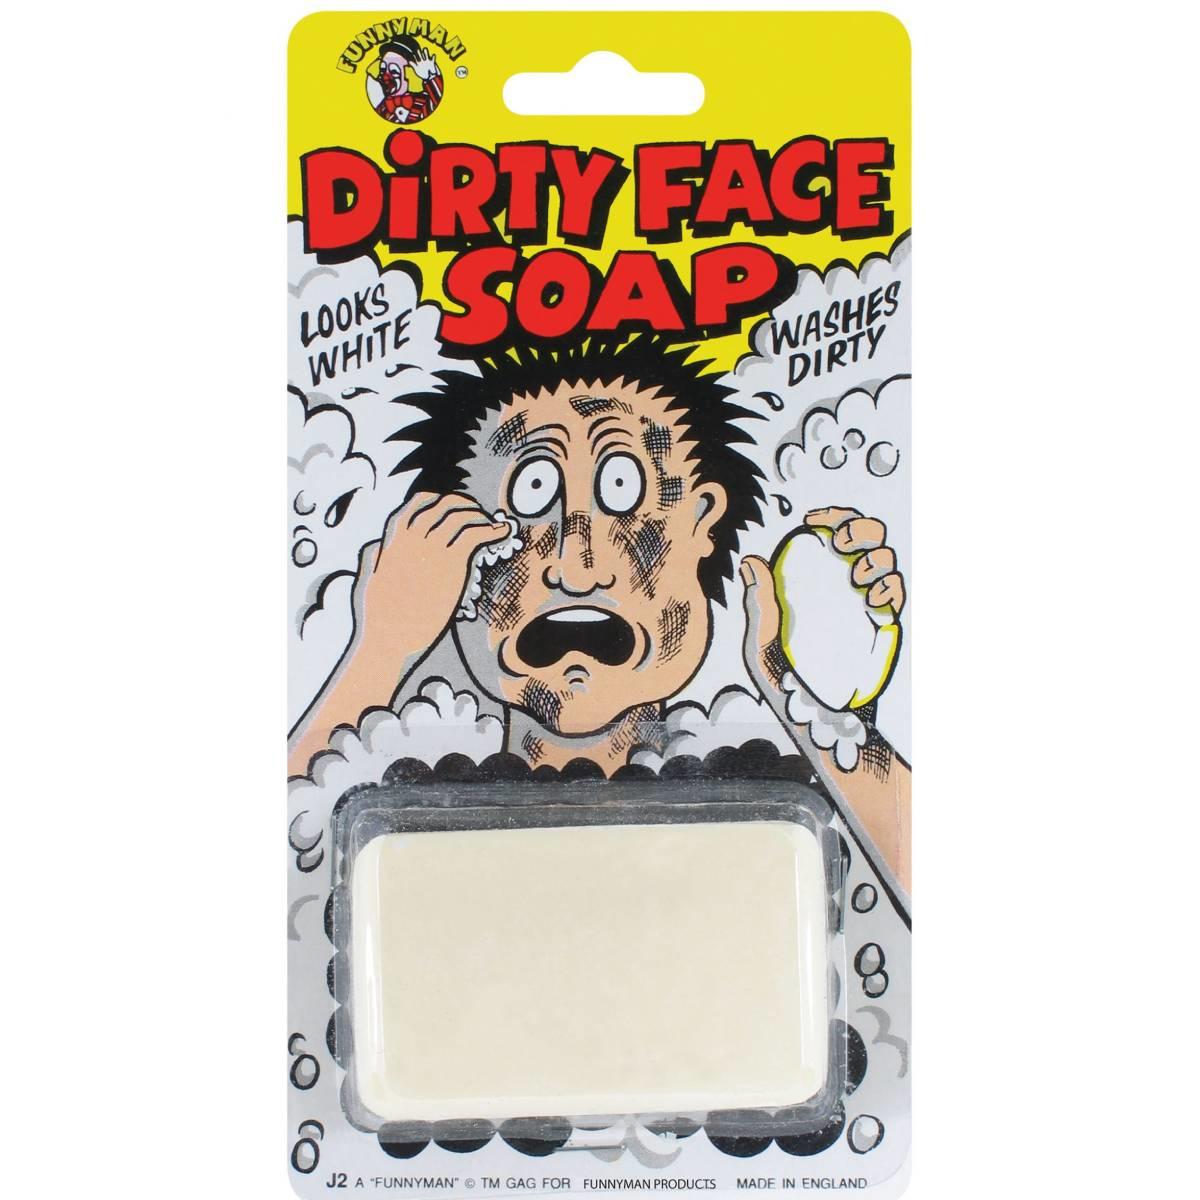 Black Face Soap by Funnyman J2 / GJ452 available here at Karnival Costumes online party shop